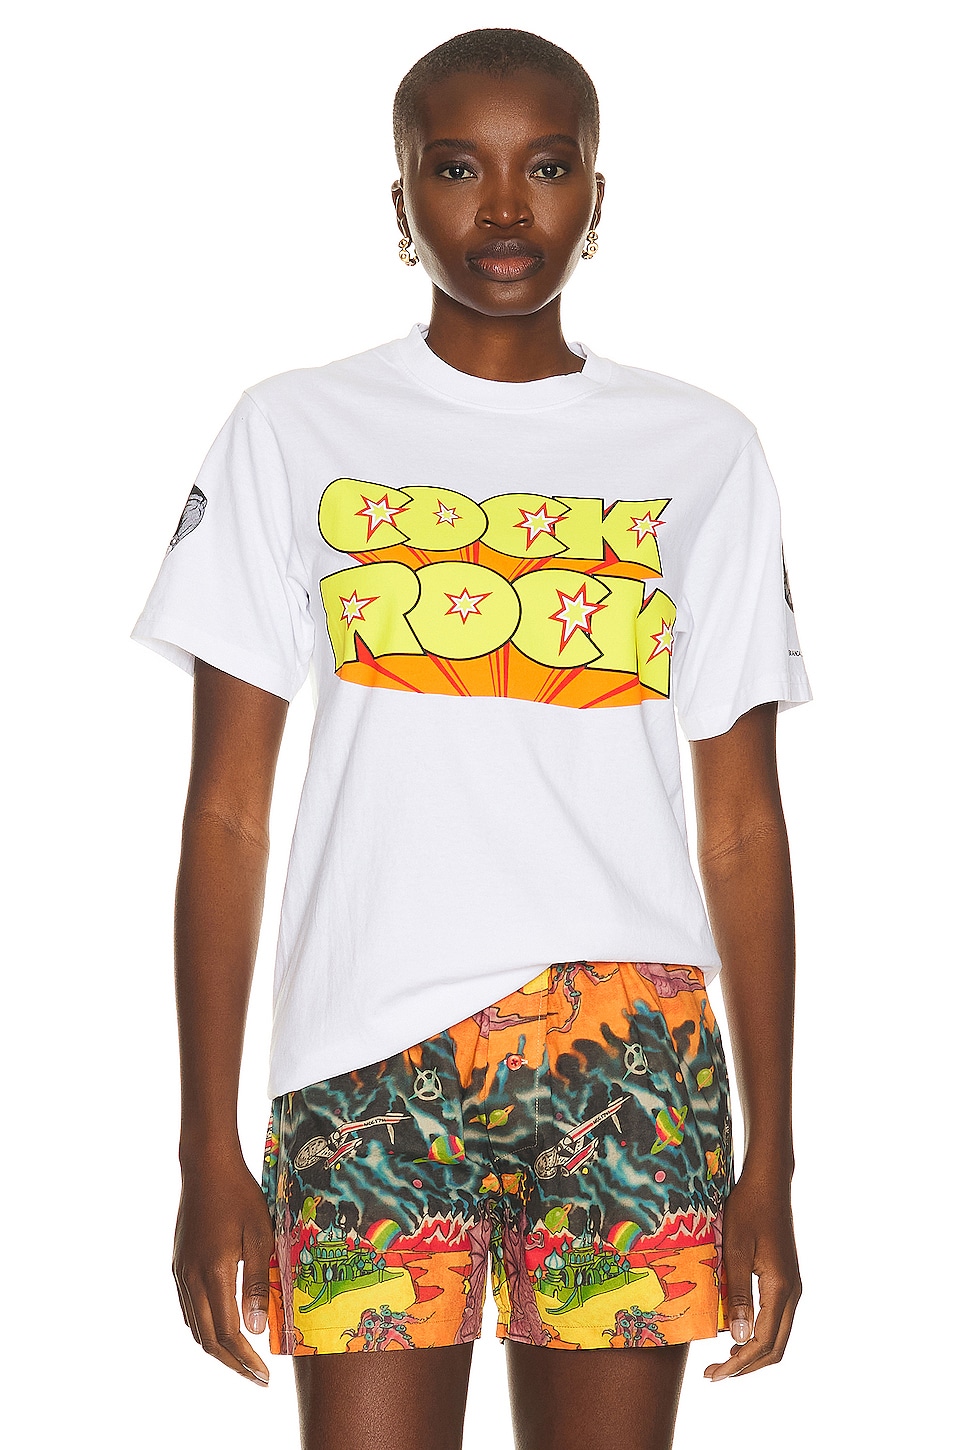 Image 1 of Bianca Chandon Glam Rock T-Shirt in White